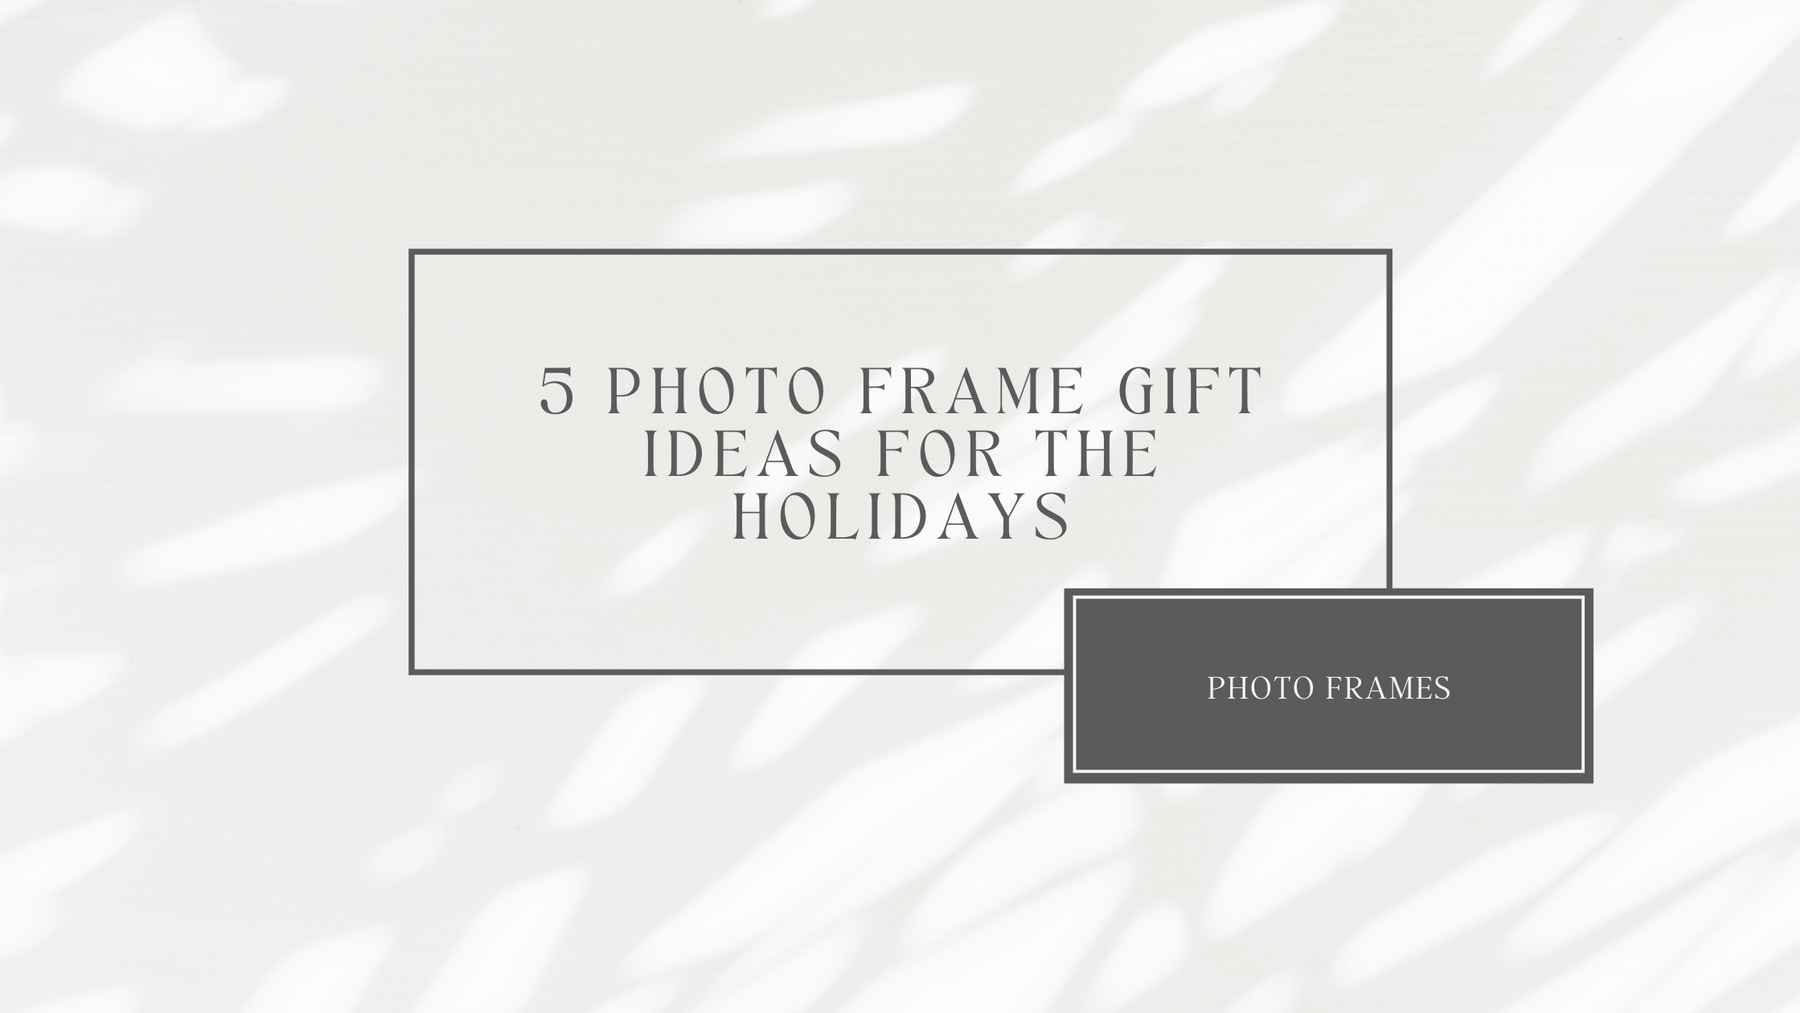 5 Photo Frame Gift Ideas for the Holidays